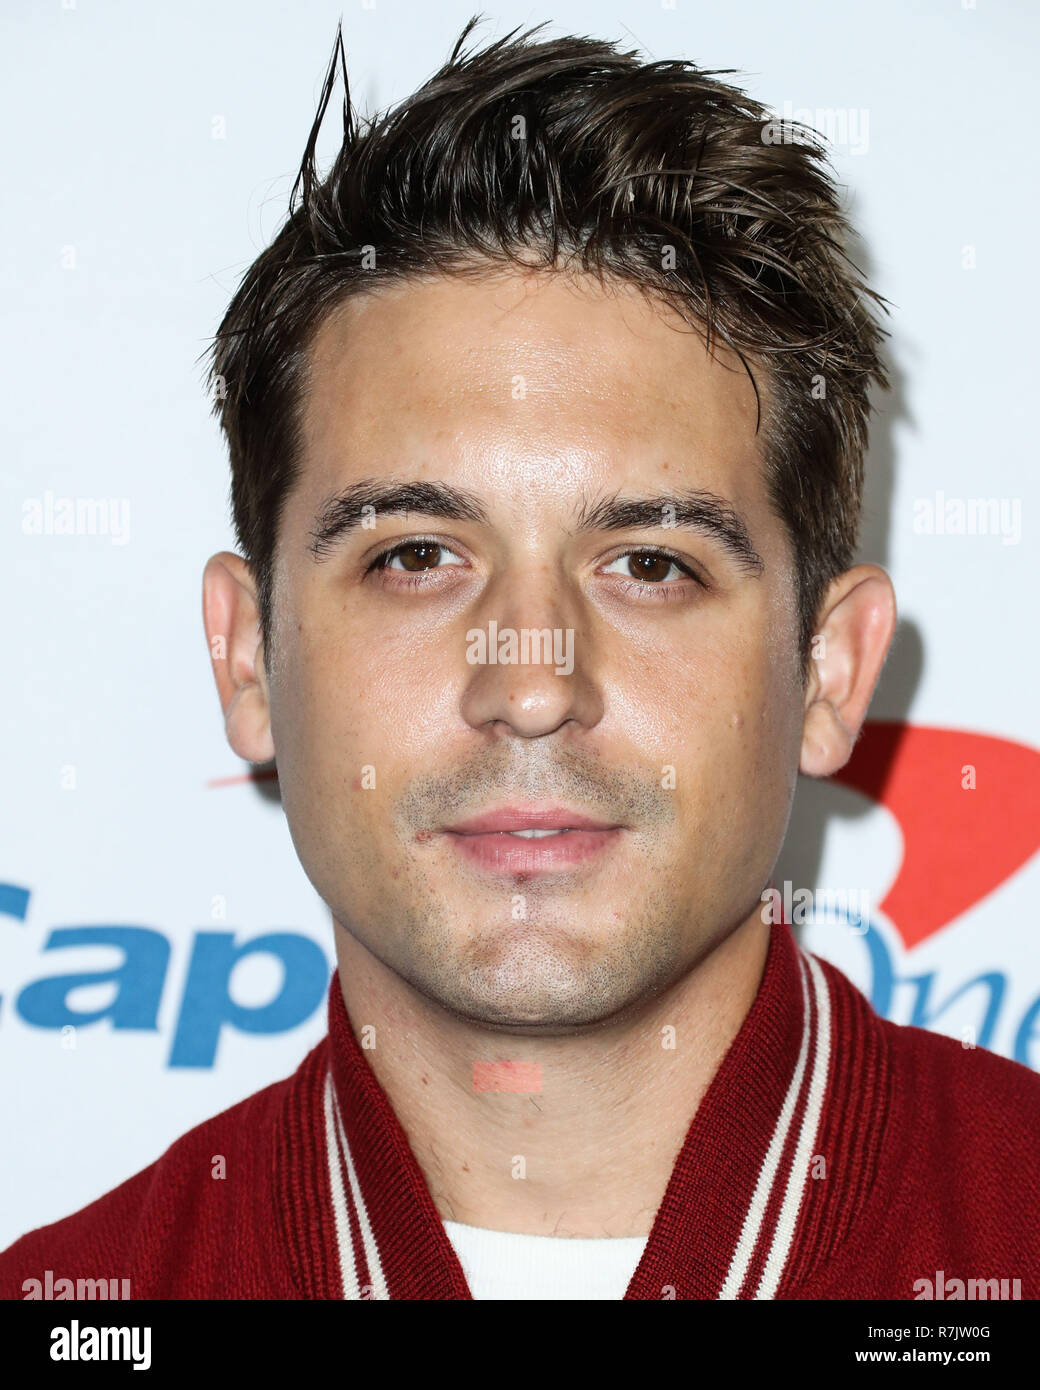 https://c8.alamy.com/comp/R7JW0G/inglewood-los-angeles-ca-usa-november-30-g-eazy-at-1027-kiis-fms-jingle-ball-2018-held-at-the-forum-on-november-30-2018-in-inglewood-los-angeles-california-united-states-photo-by-xavier-collinimage-press-agency-R7JW0G.jpg